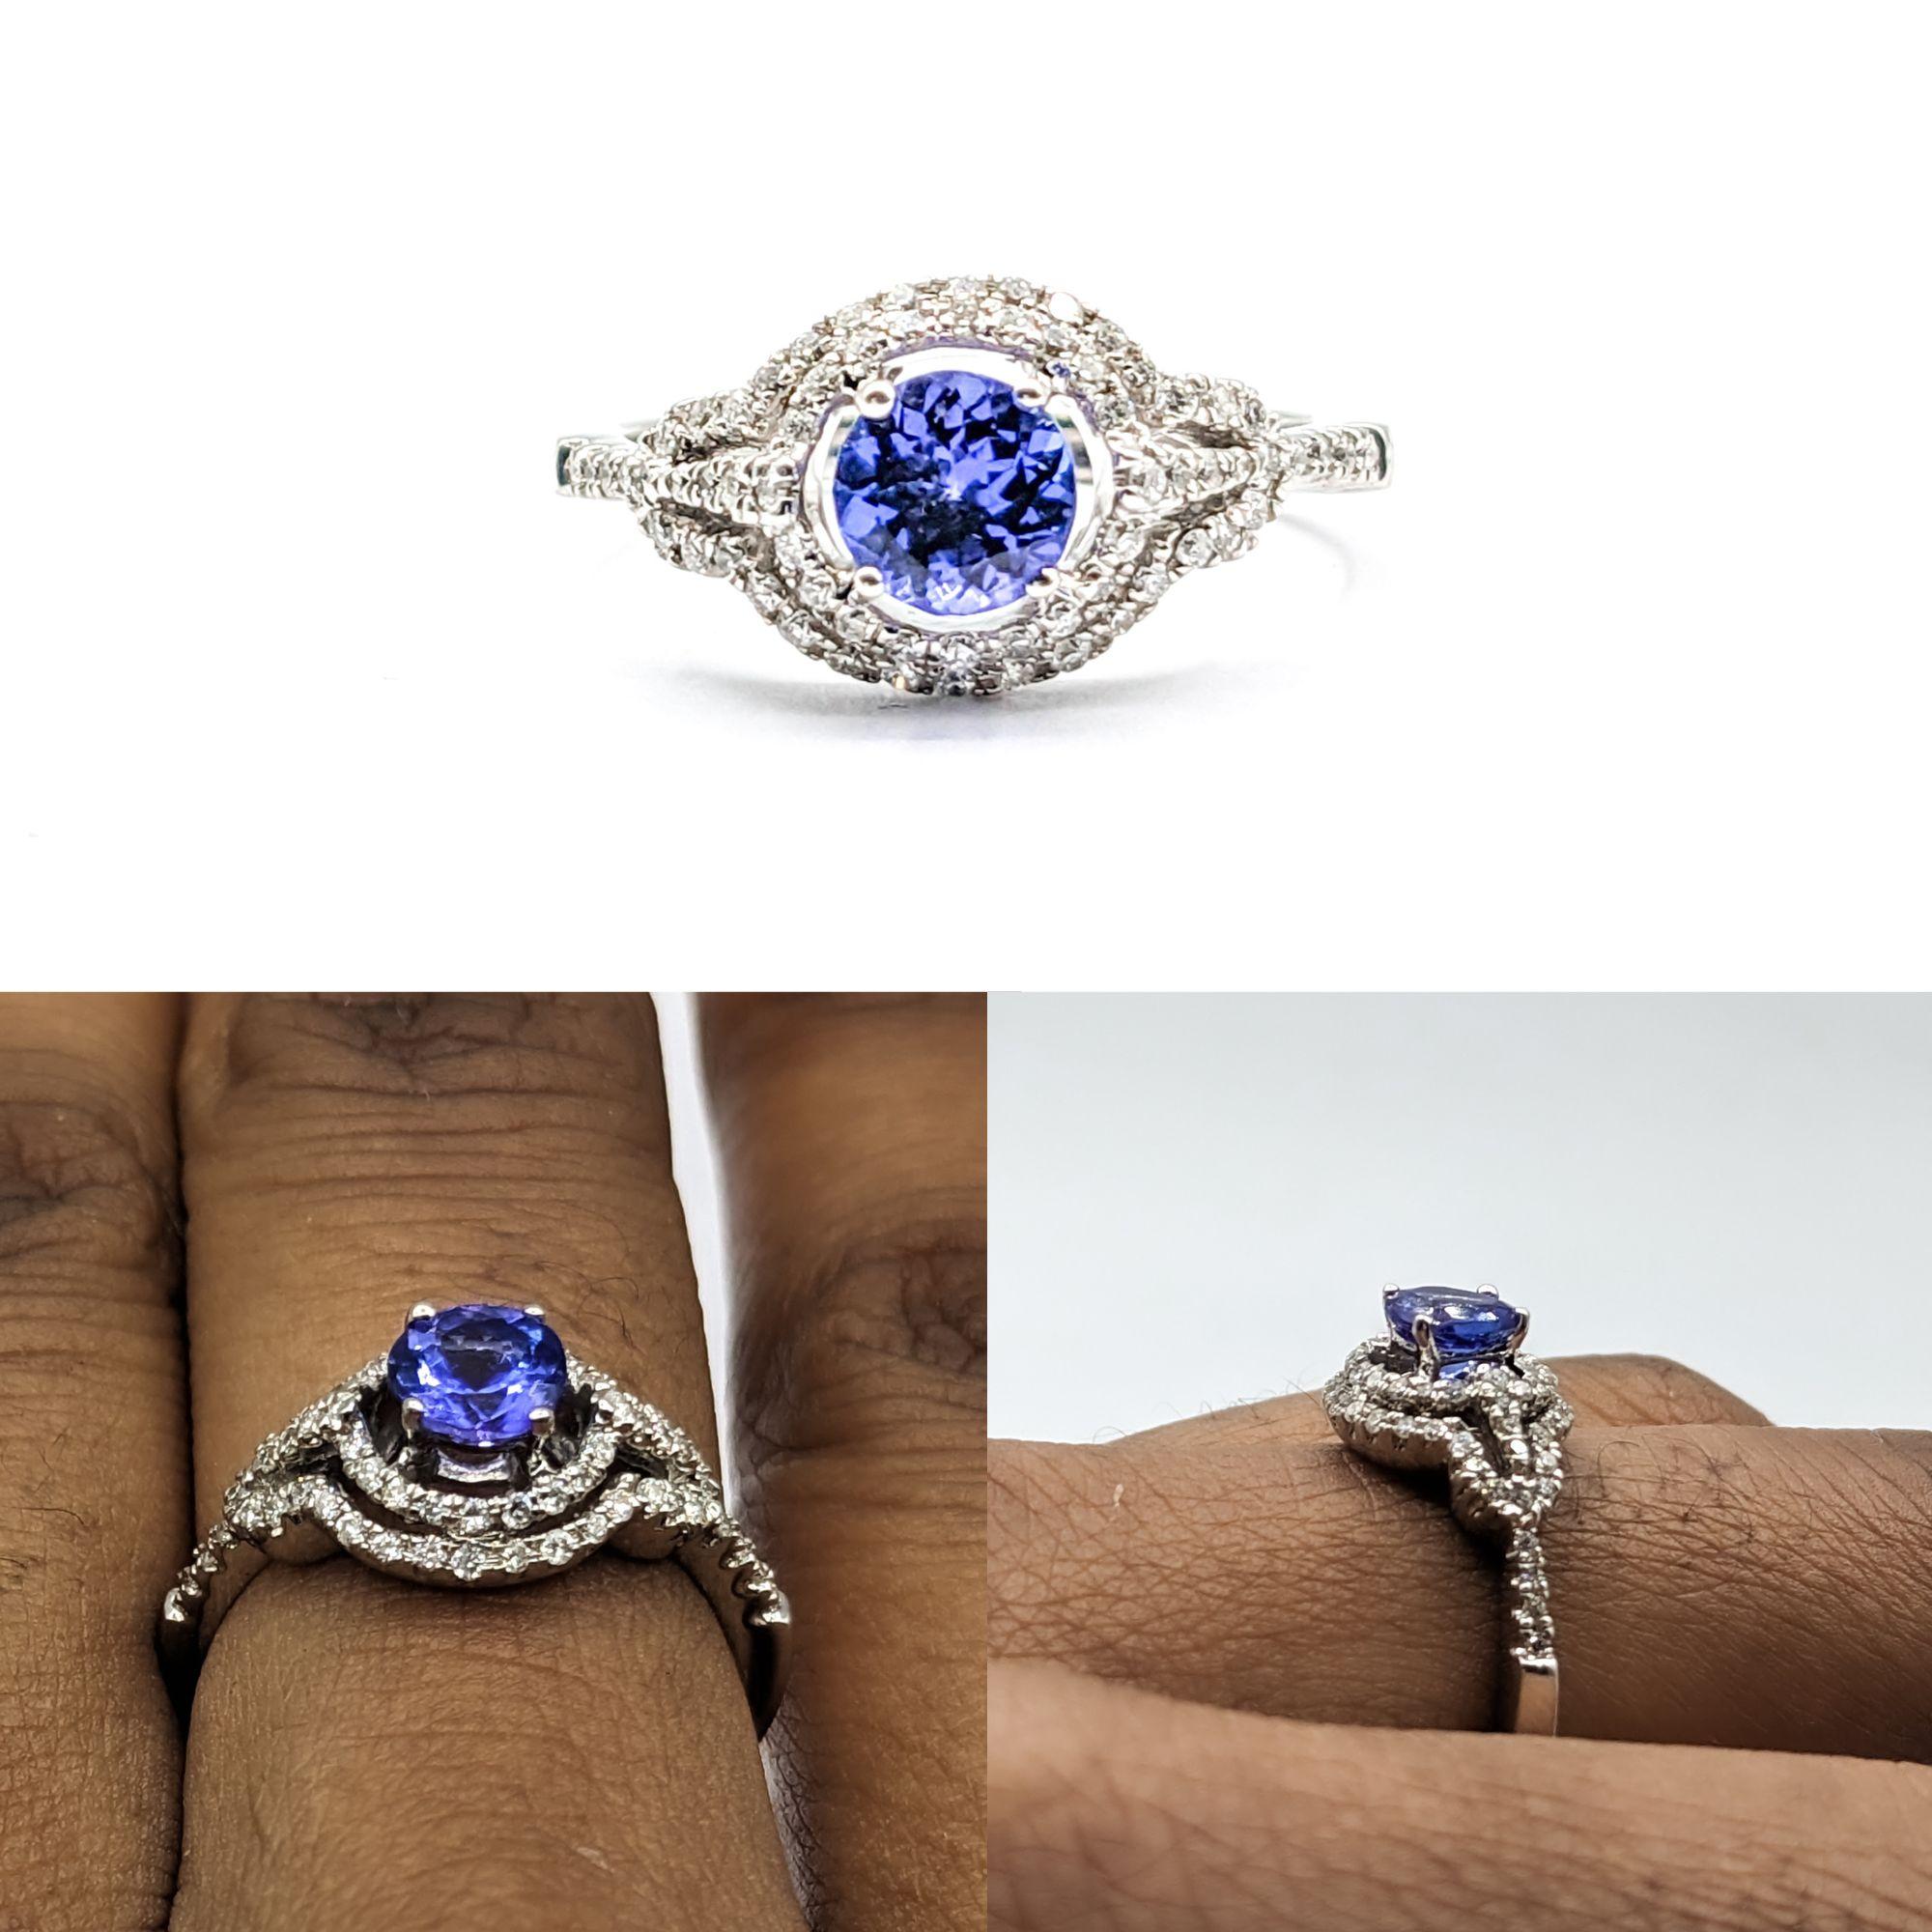 0.69ct Tanzanite & Diamond Ring In White Gold


This exquisite gemstone fashion ring is elegantly crafted in 14kt white gold, featuring a magnificent 0.69ct tanzanite centerpiece. Complementing the vivid blue-violet hues of the tanzanite are 0.31ctw